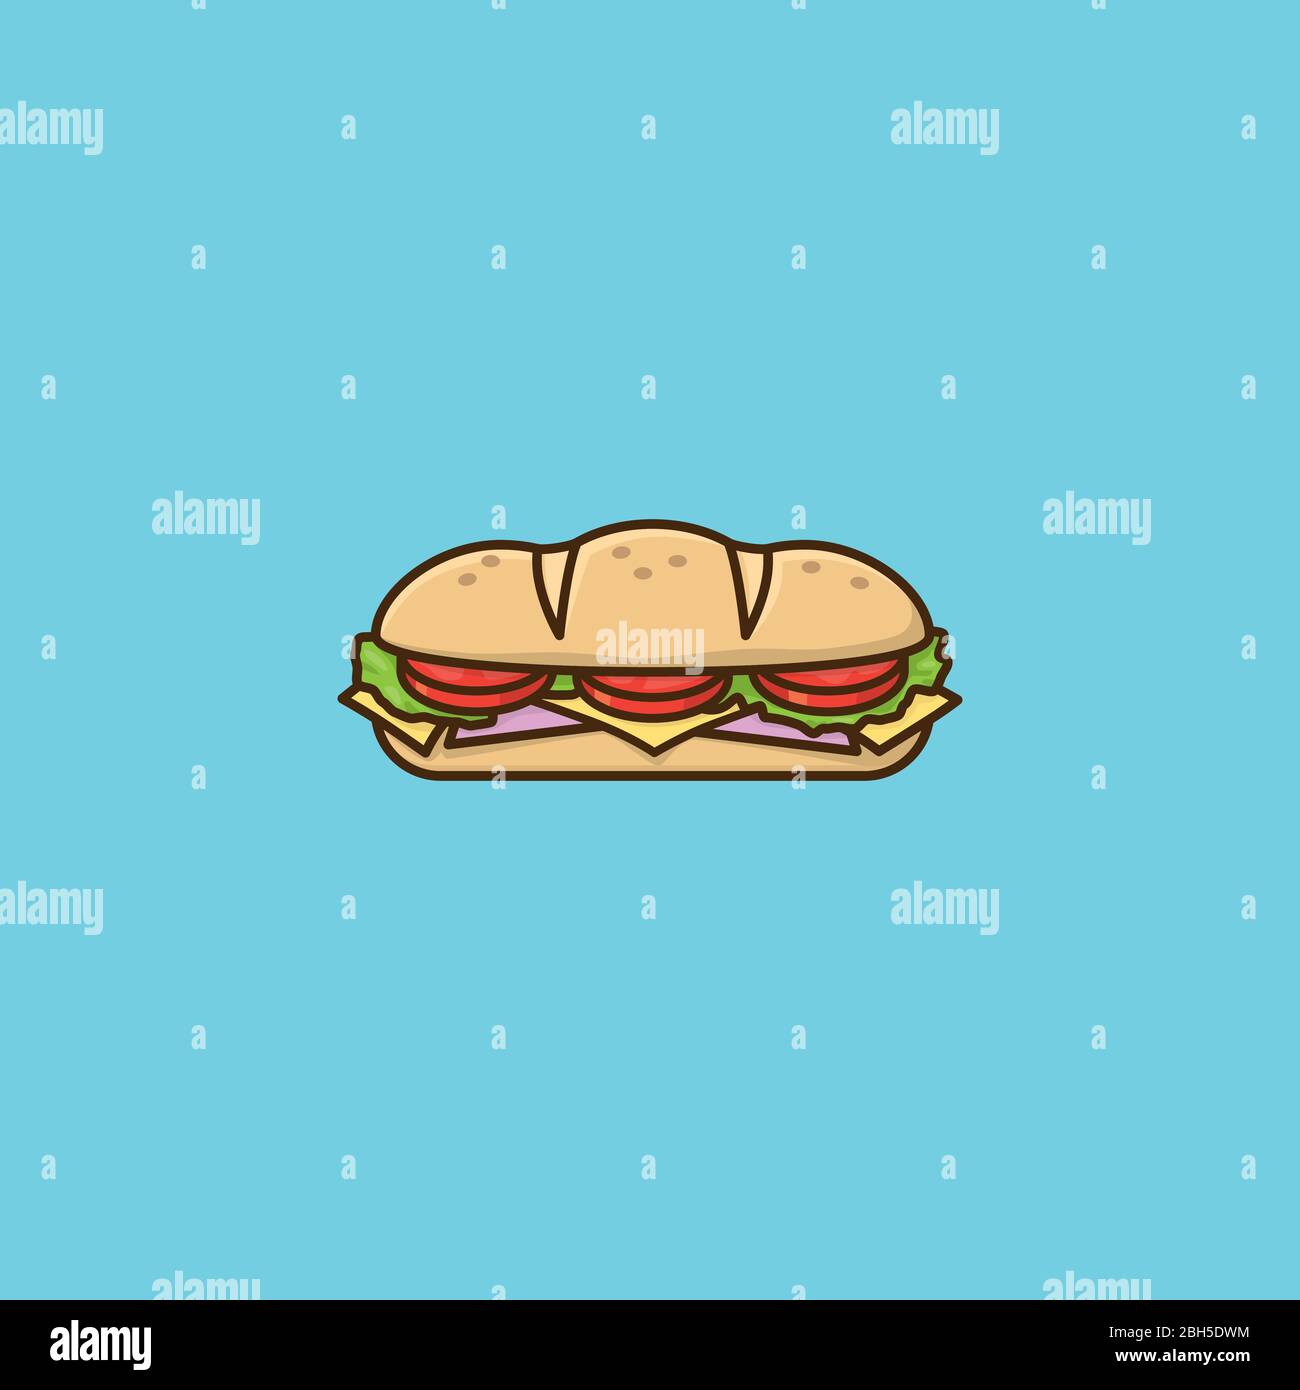 Hoagie or sub with tomato, lettuce, ham, and cheese vector illustration for Hoagie Day on May 5th. Take-away food color symbol. Stock Vector